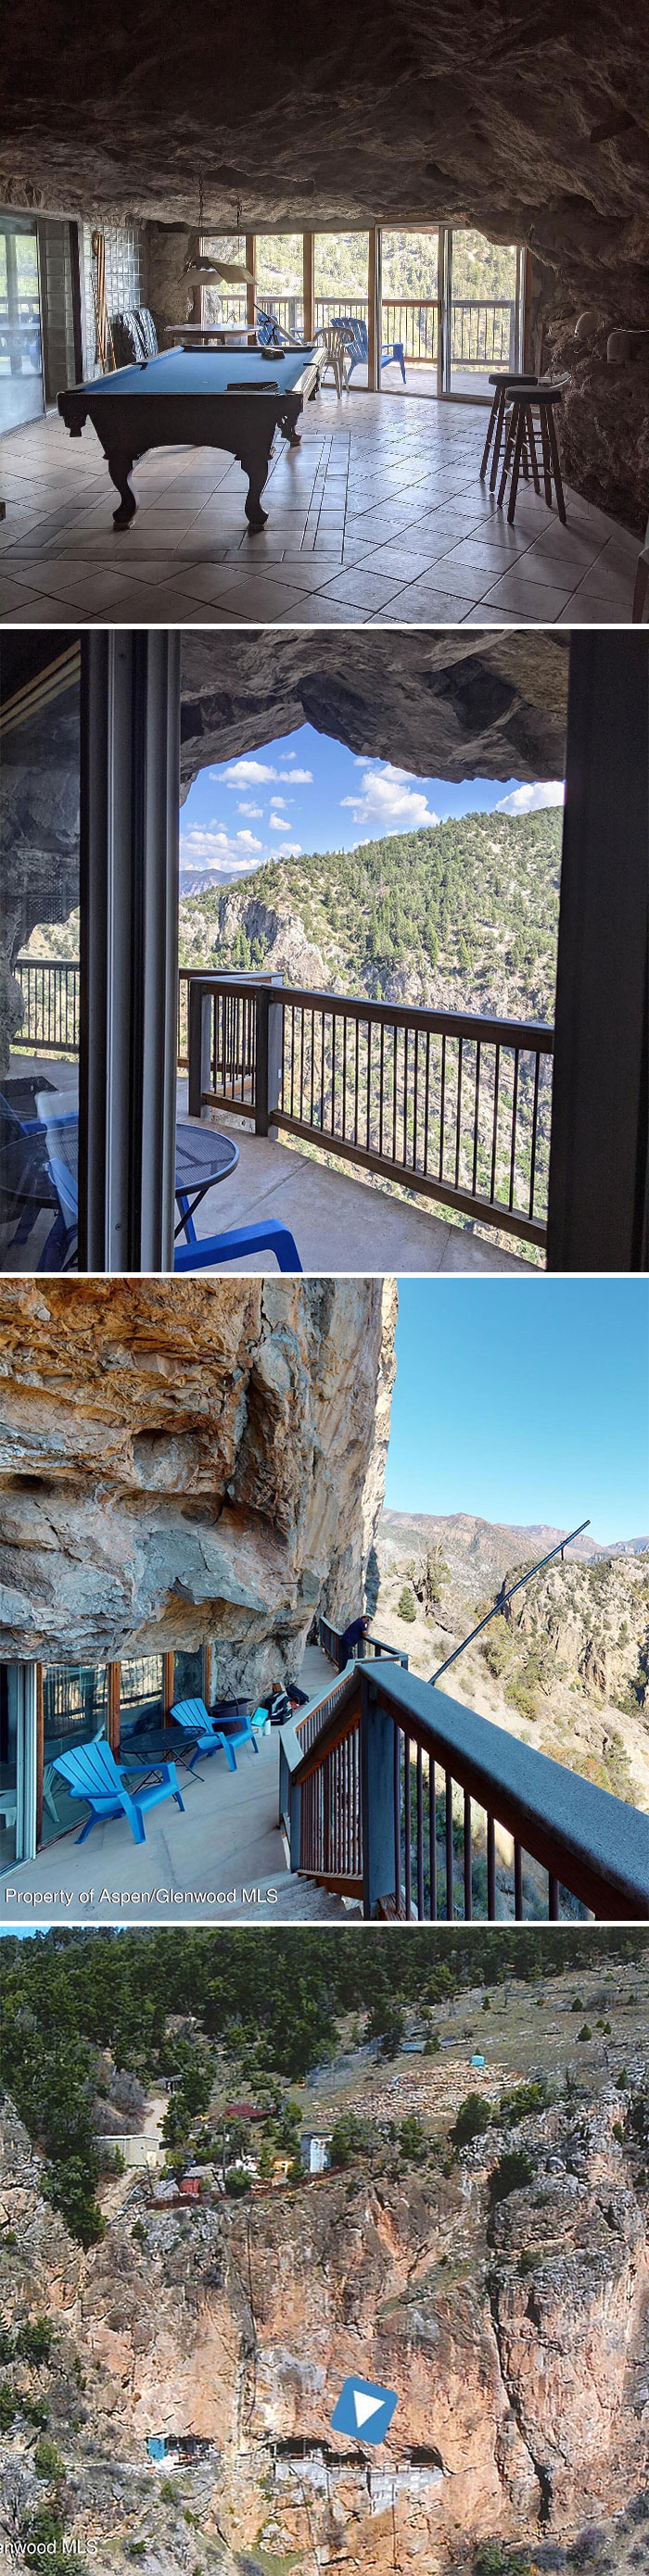 This Is The Most Literal Cave House We’ve Ever Seen Because It Is Literally “Nestled Within The Glenwood Springs Canyon Walls”!! Currently Listed For $2,450,000 In Glenwood Springs, Co. 25.13 Acres